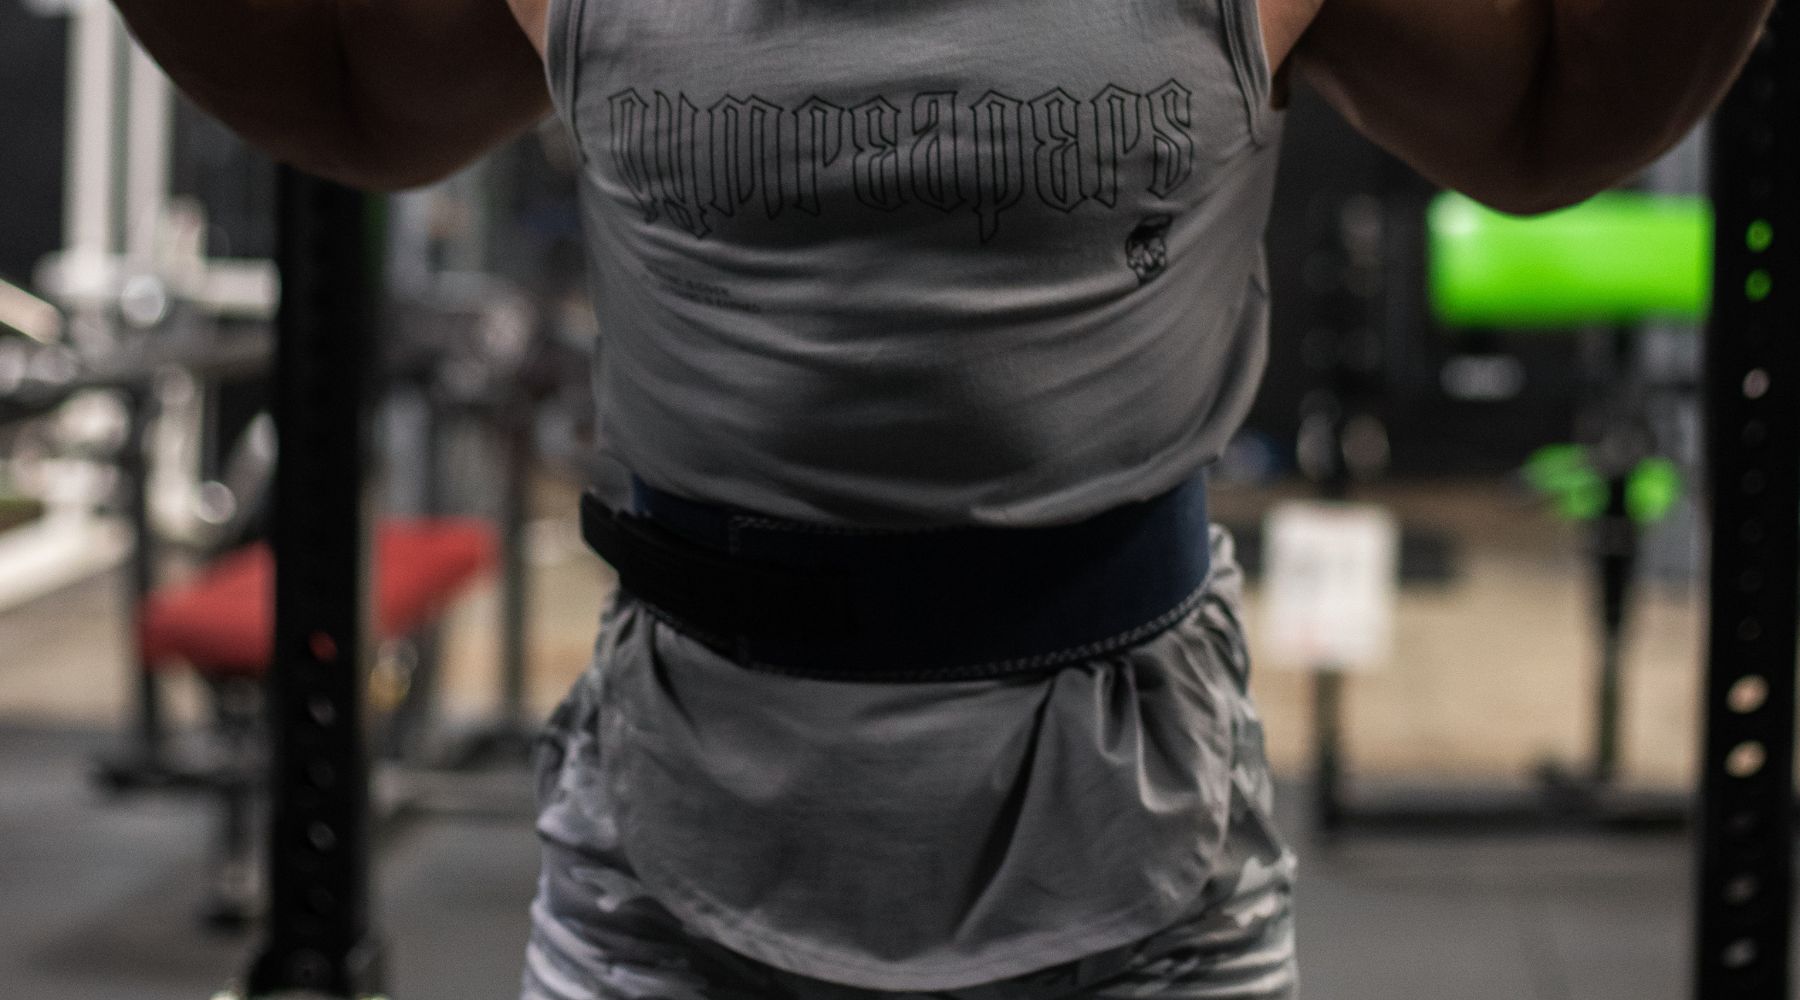 My Lifting Belt Gives Me Bruises: 4 Reasons & How to Fix